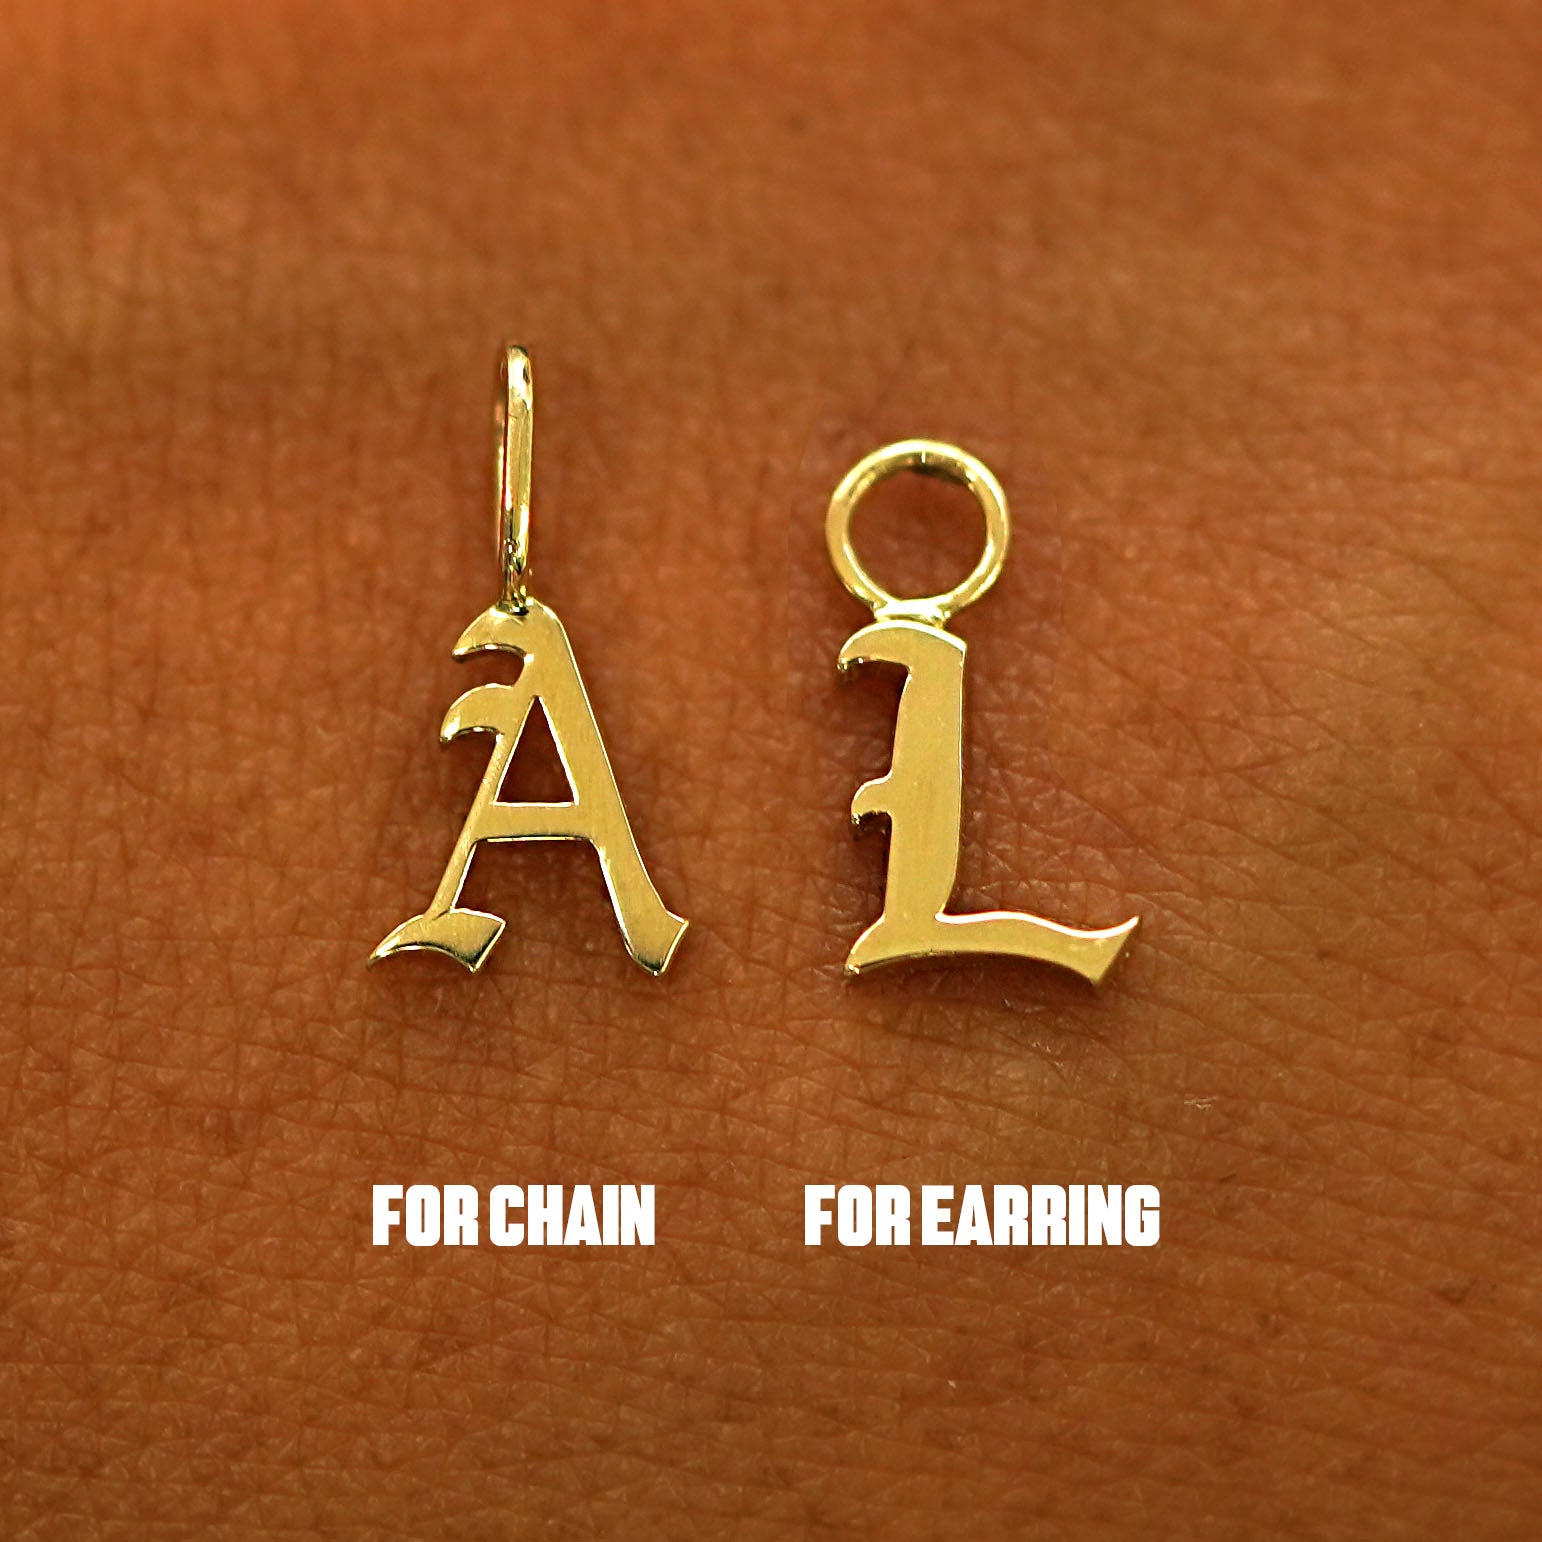 Two versions of the Initial Charm in the letter A and the letter L showing For Chain and For Earring options respectively